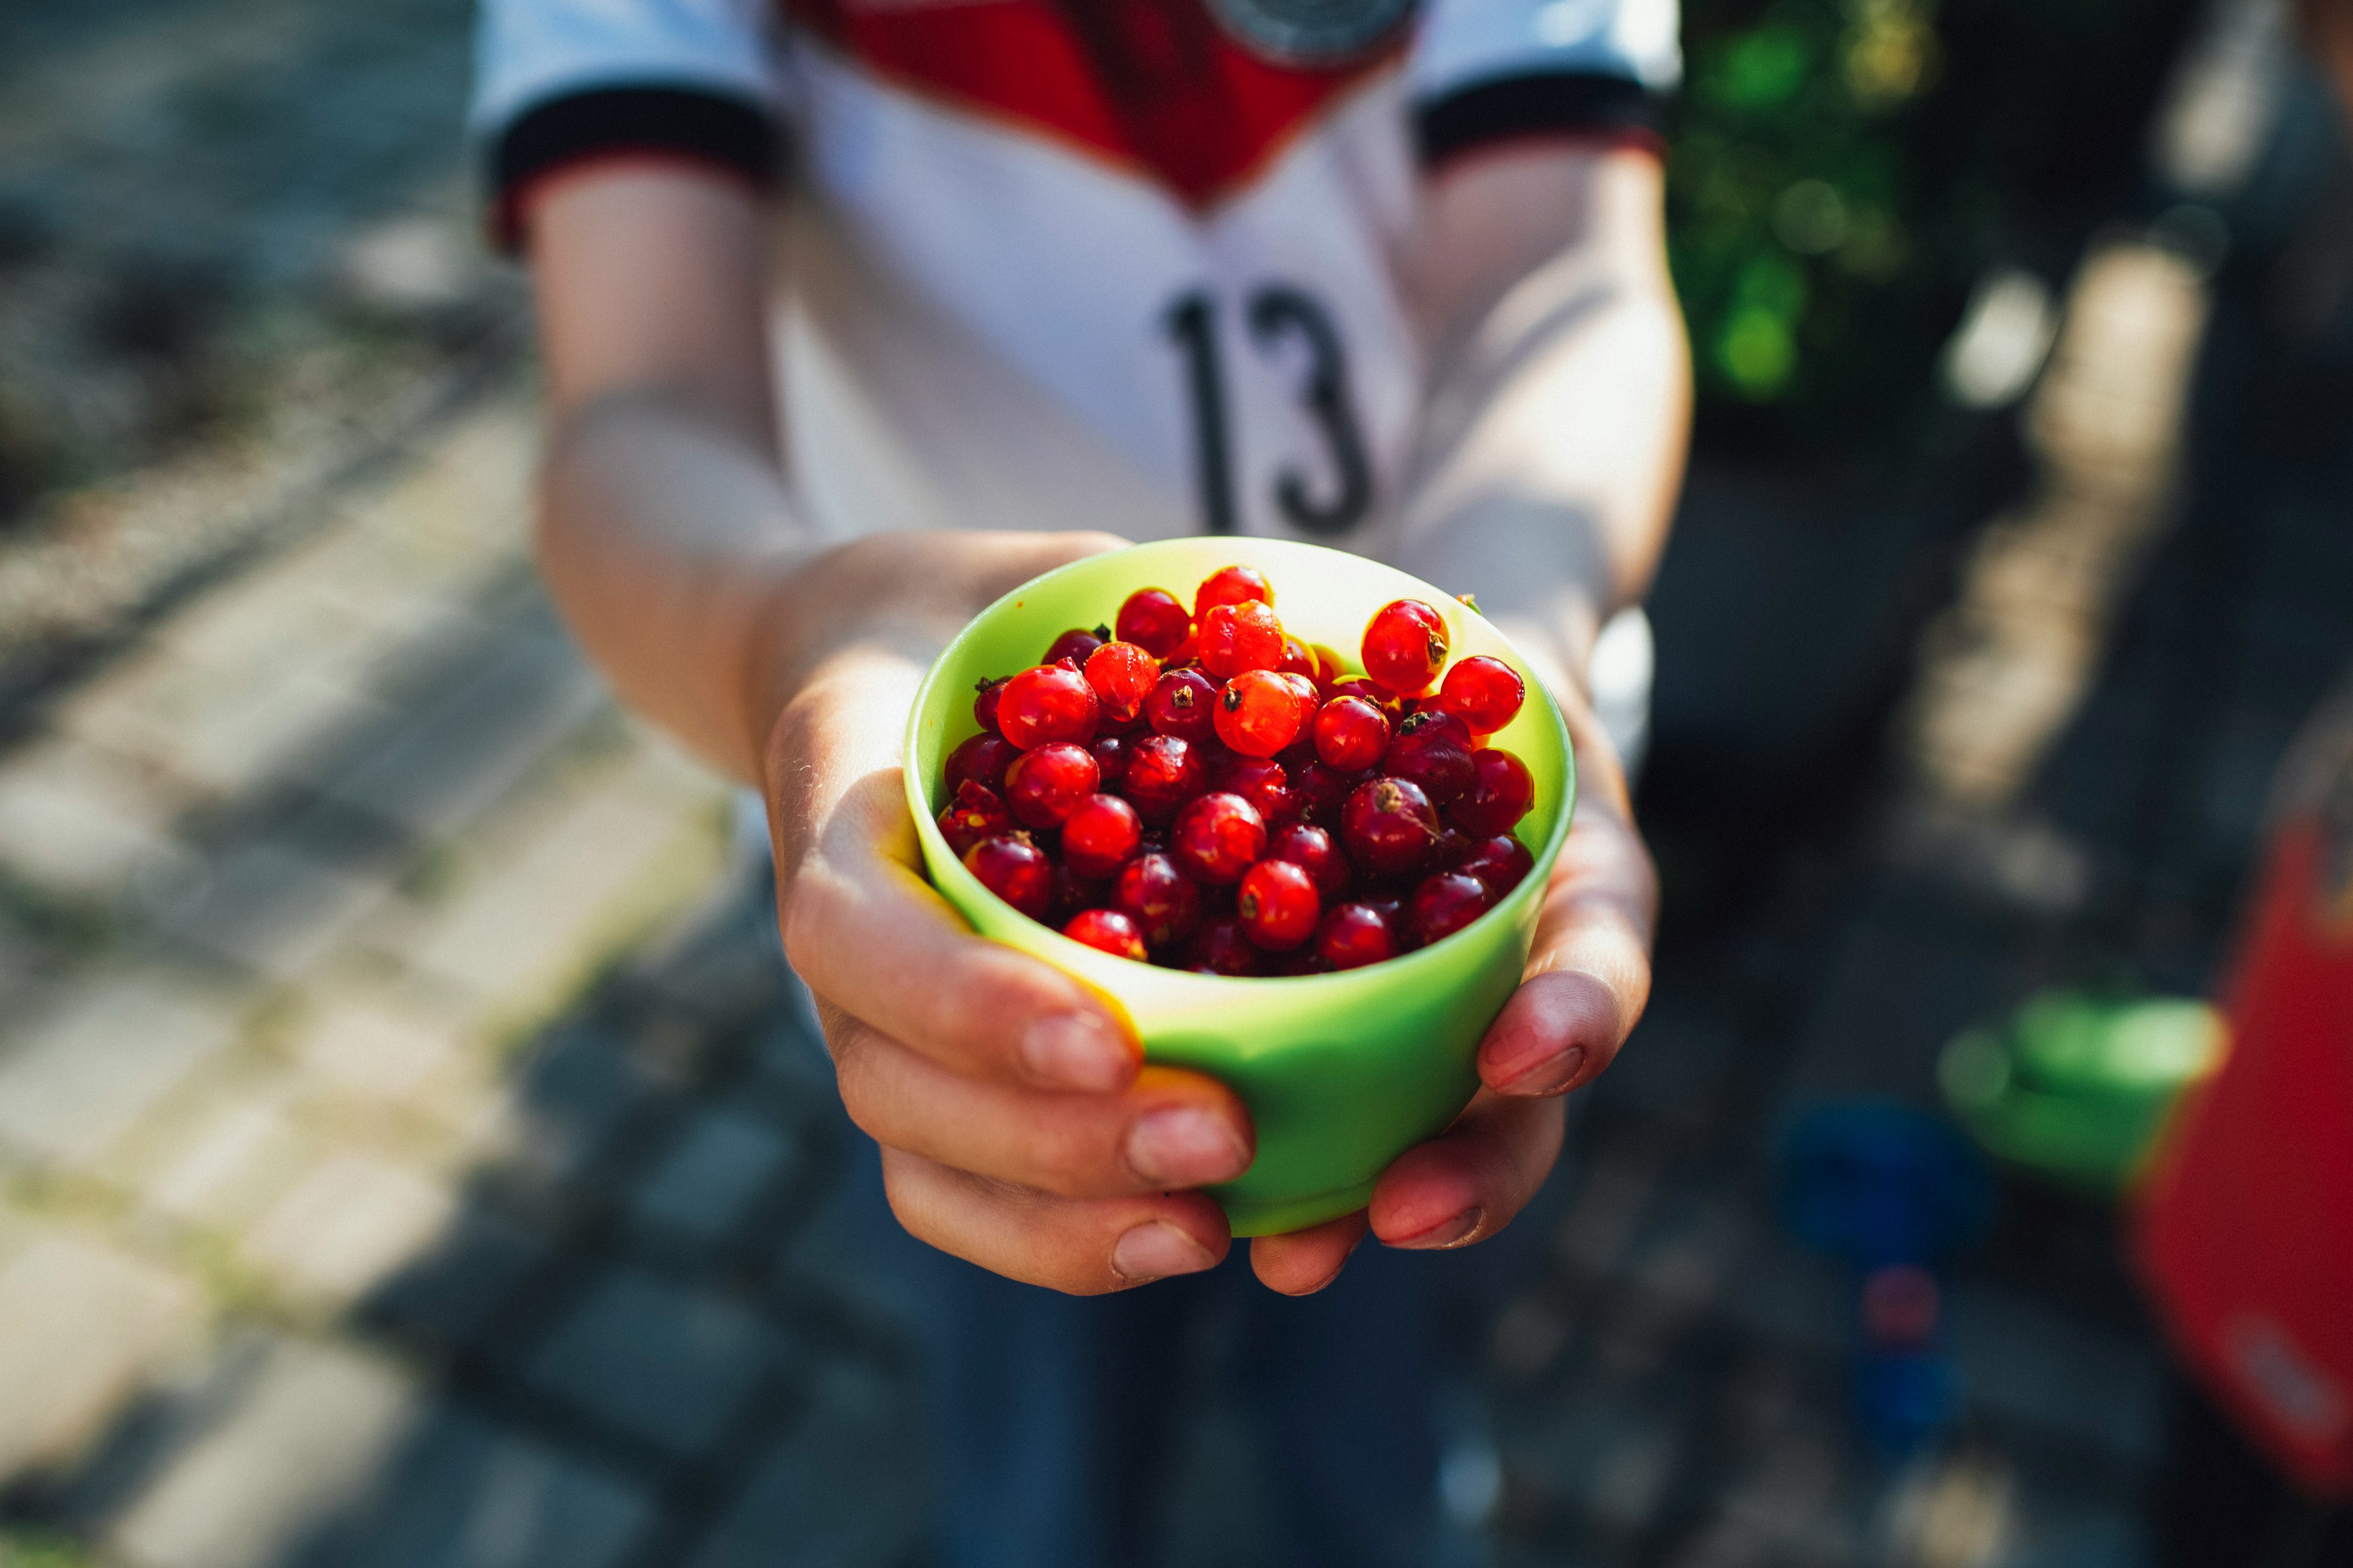 person holding green ceramic bowl with red and white fruits